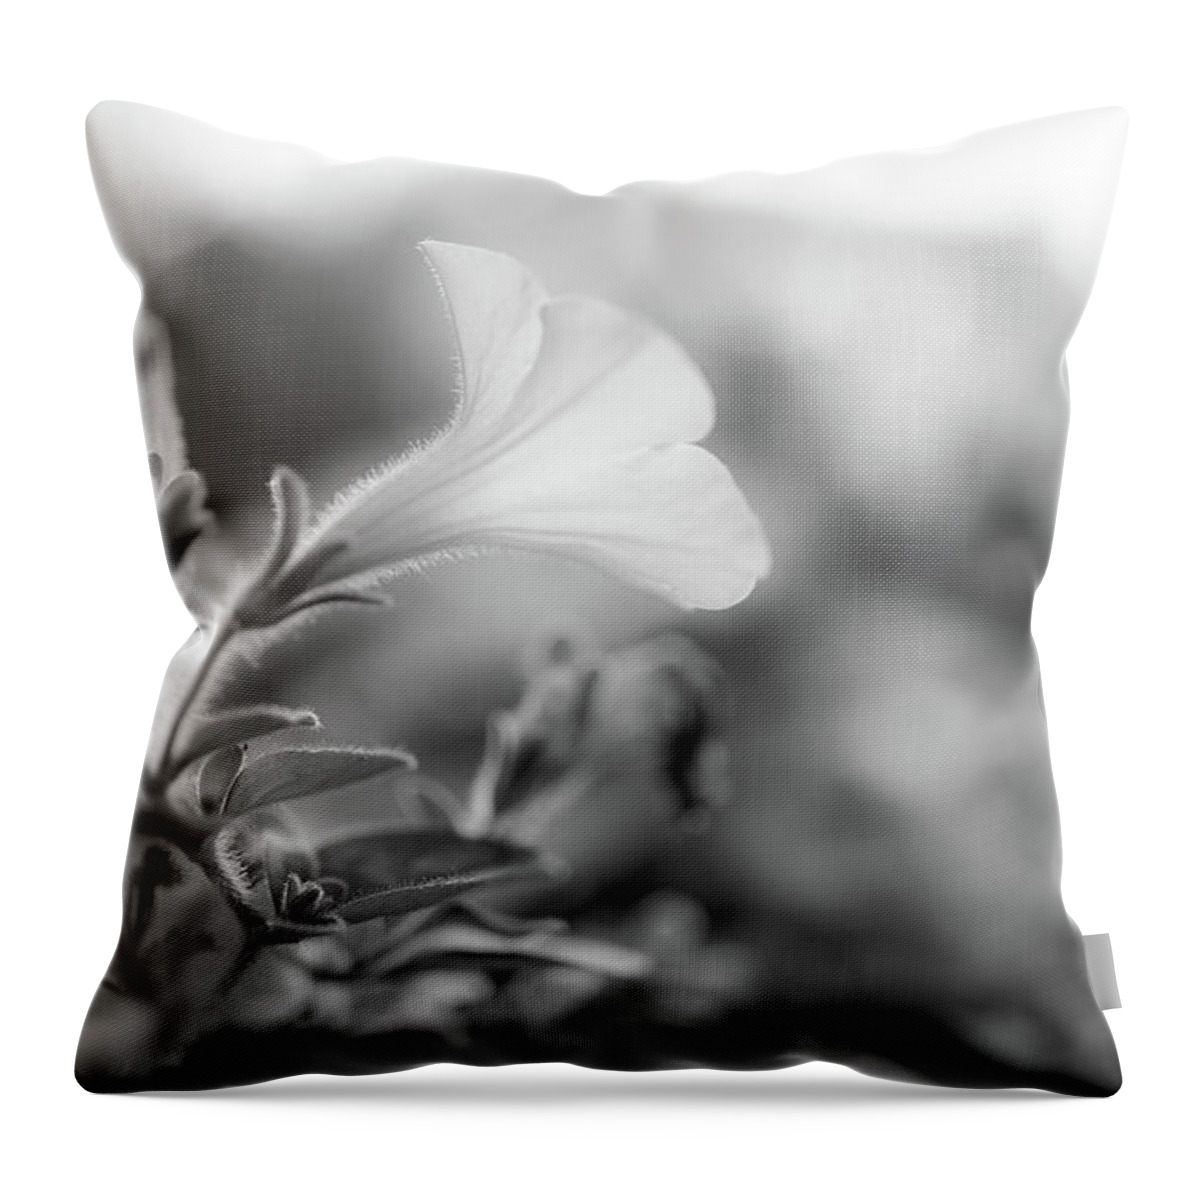 Petunia Throw Pillow featuring the photograph Petunia Impressions by Bob Orsillo